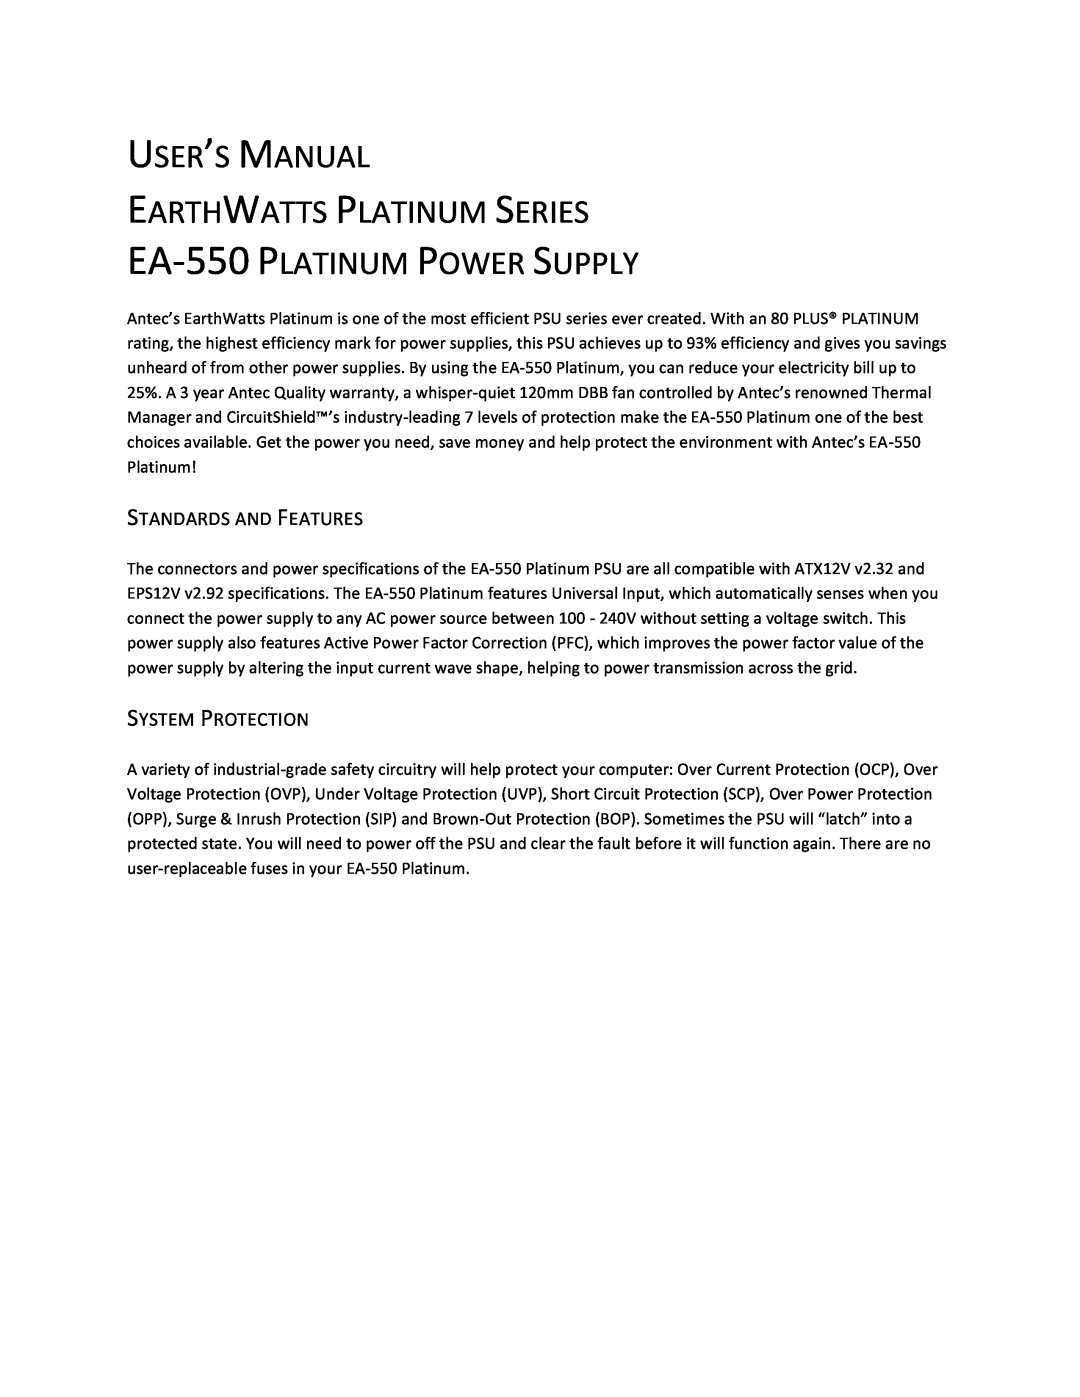 Antec USER’S MANUAL EARTHWATTS PLATINUM SERIES EA-550 PLATINUM POWER SUPPLY, Standards And Features, System Protection 